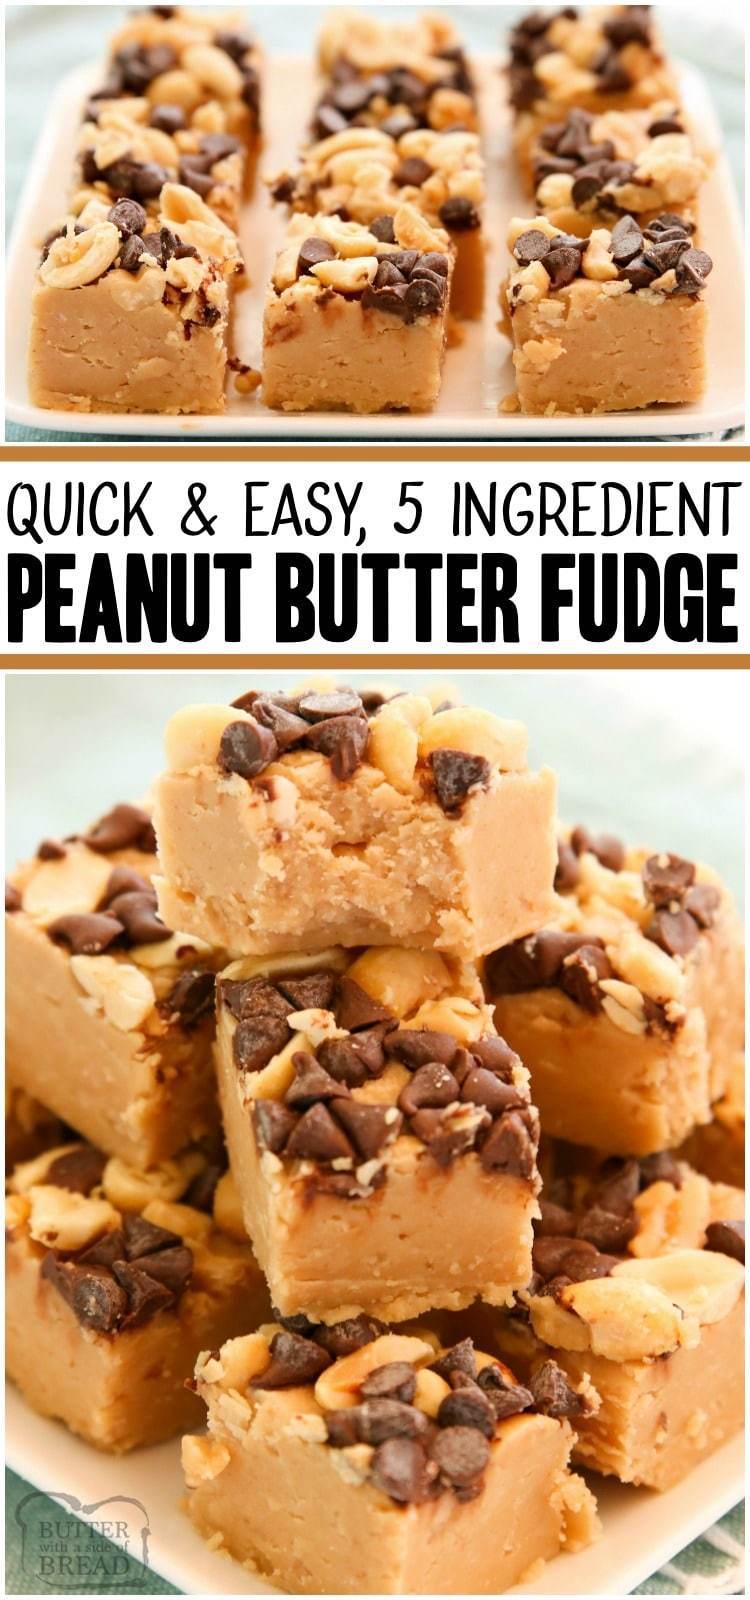 Quick & Easy Peanut Butter Fudge recipe that's done in minutes! Simple ingredients combined in the microwave for a fast, delicious peanut butter treat. #peanutbutter #fudge #dessert #nobake #recipe from BUTTER WITH A SIDE OF BREAD